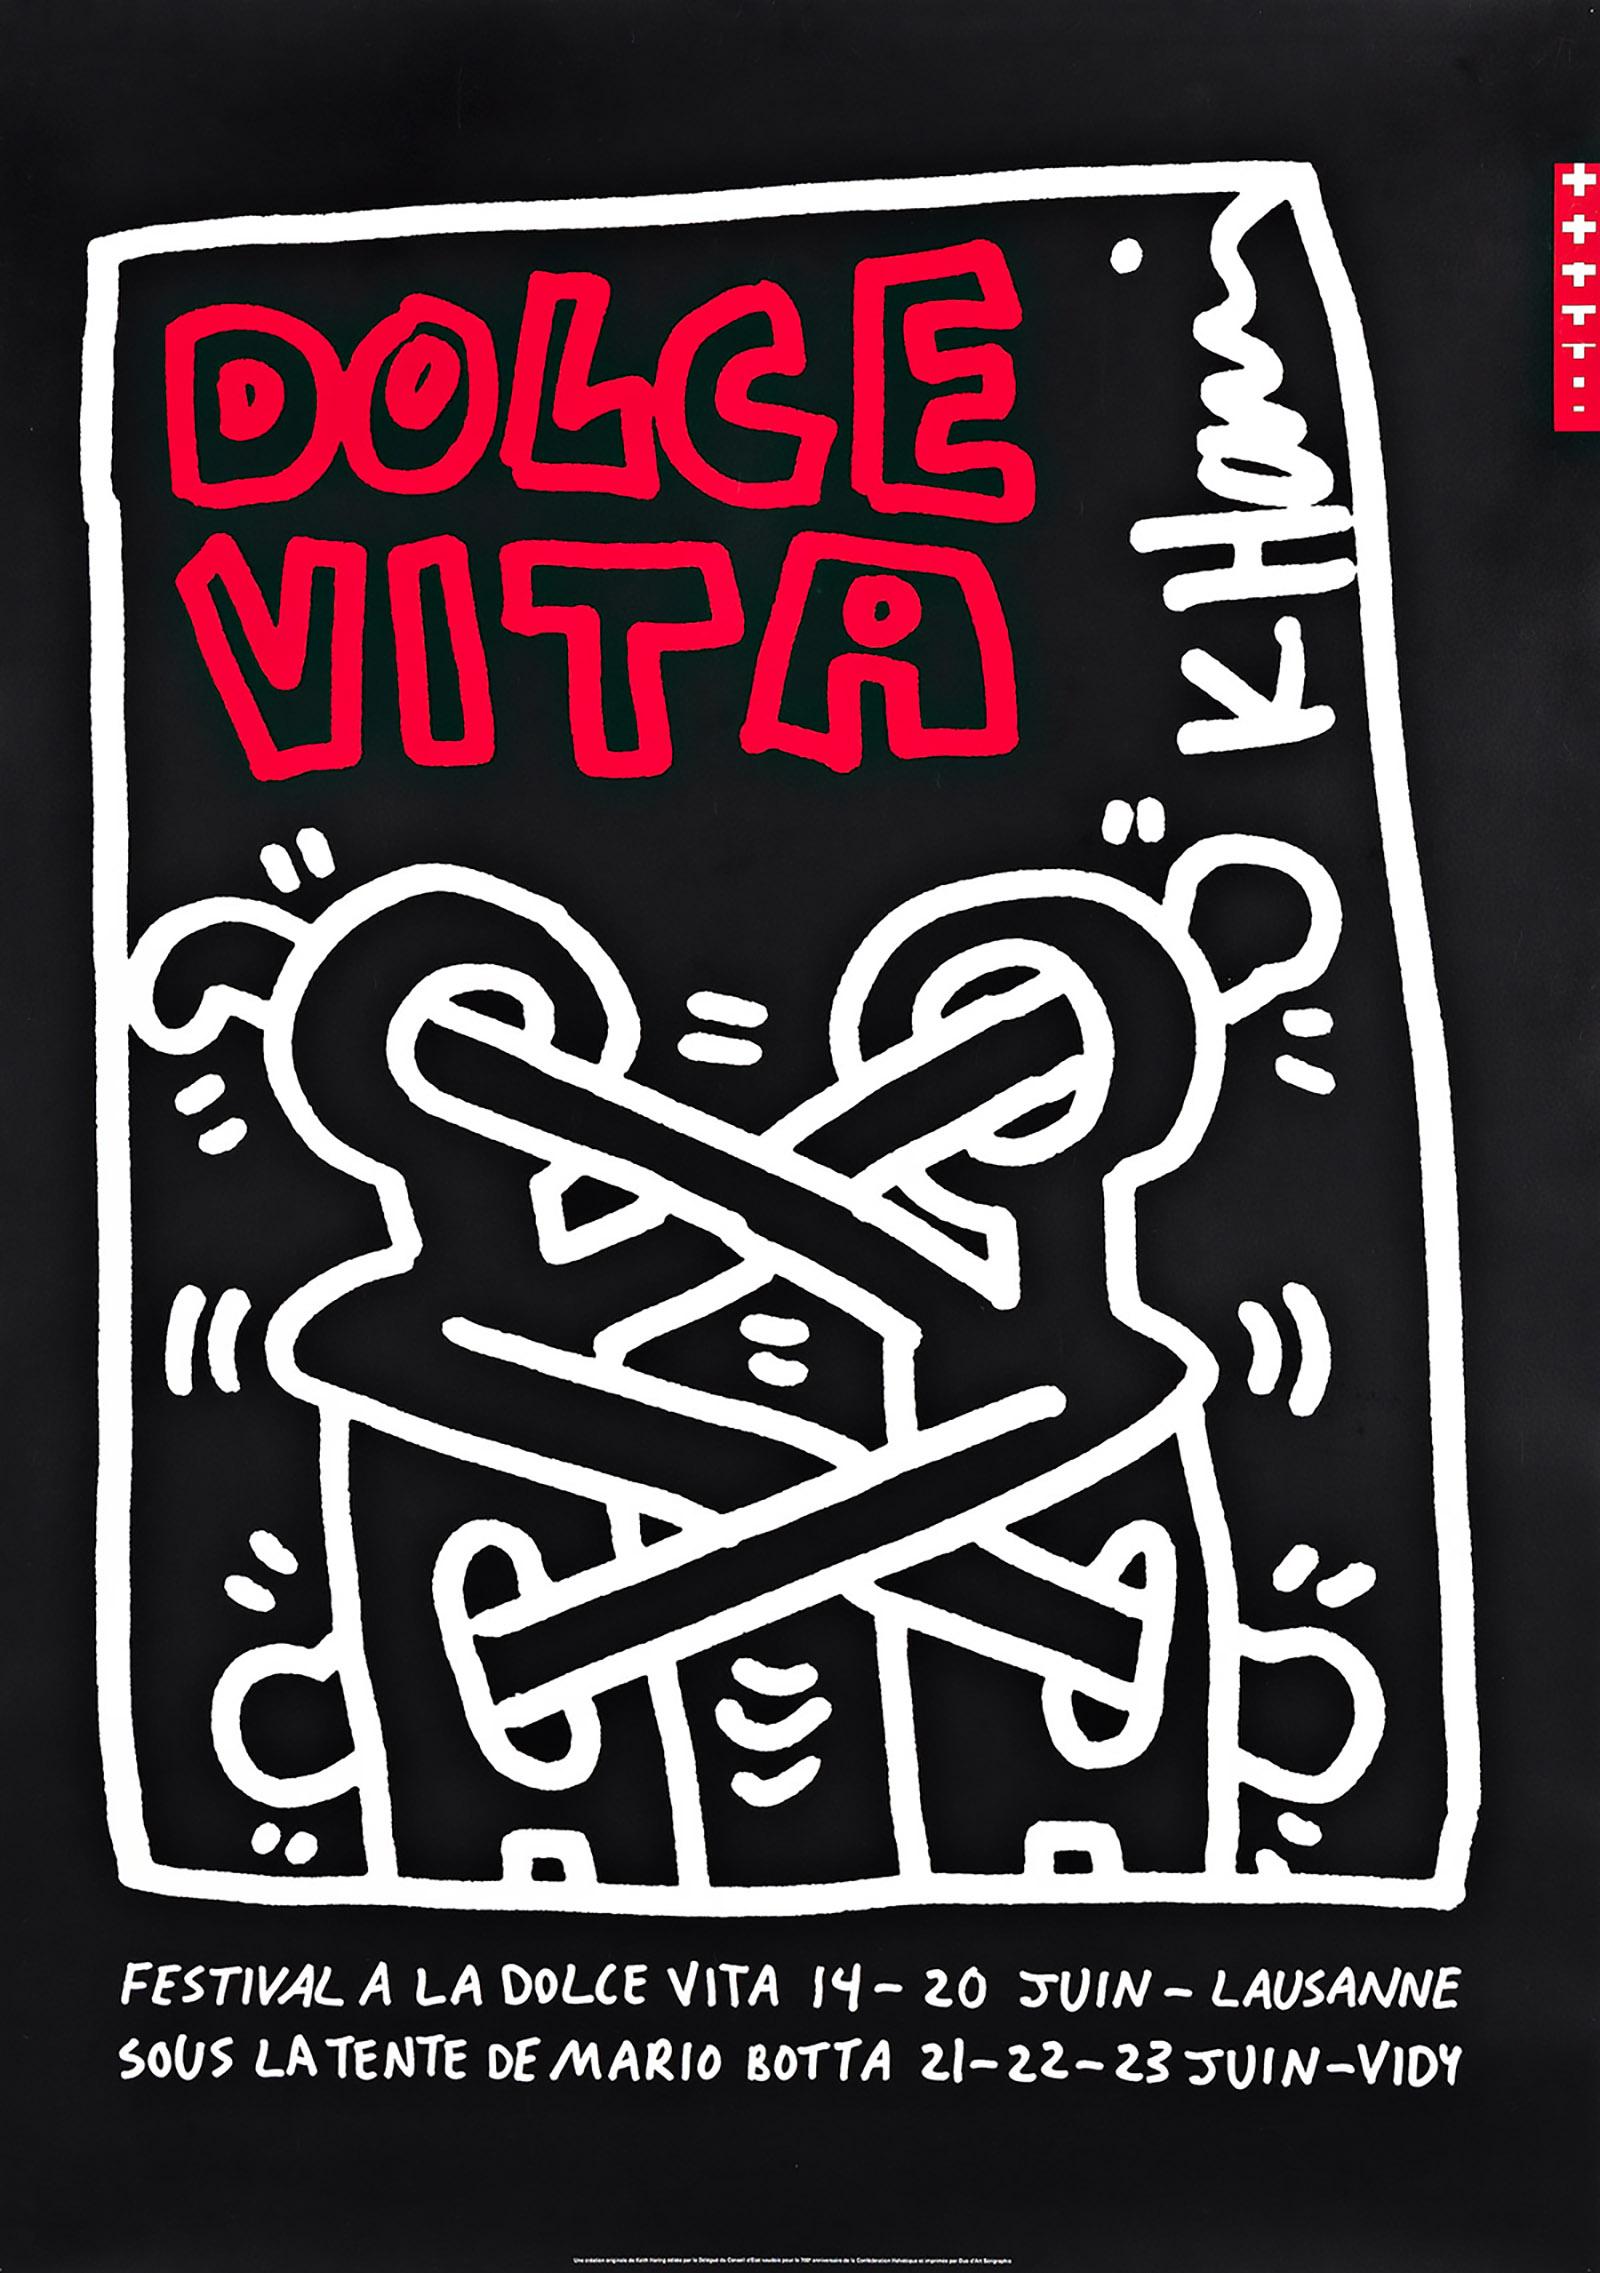 Keith Haring poster 1991 (Keith Haring Dolce Vita festival):

This brilliantly rendered 1991 Keith Haring Dolce Vita poster measuring 50 inches in height, was published on the occasion of the 700th anniversary of the Swiss Confederation. The poster